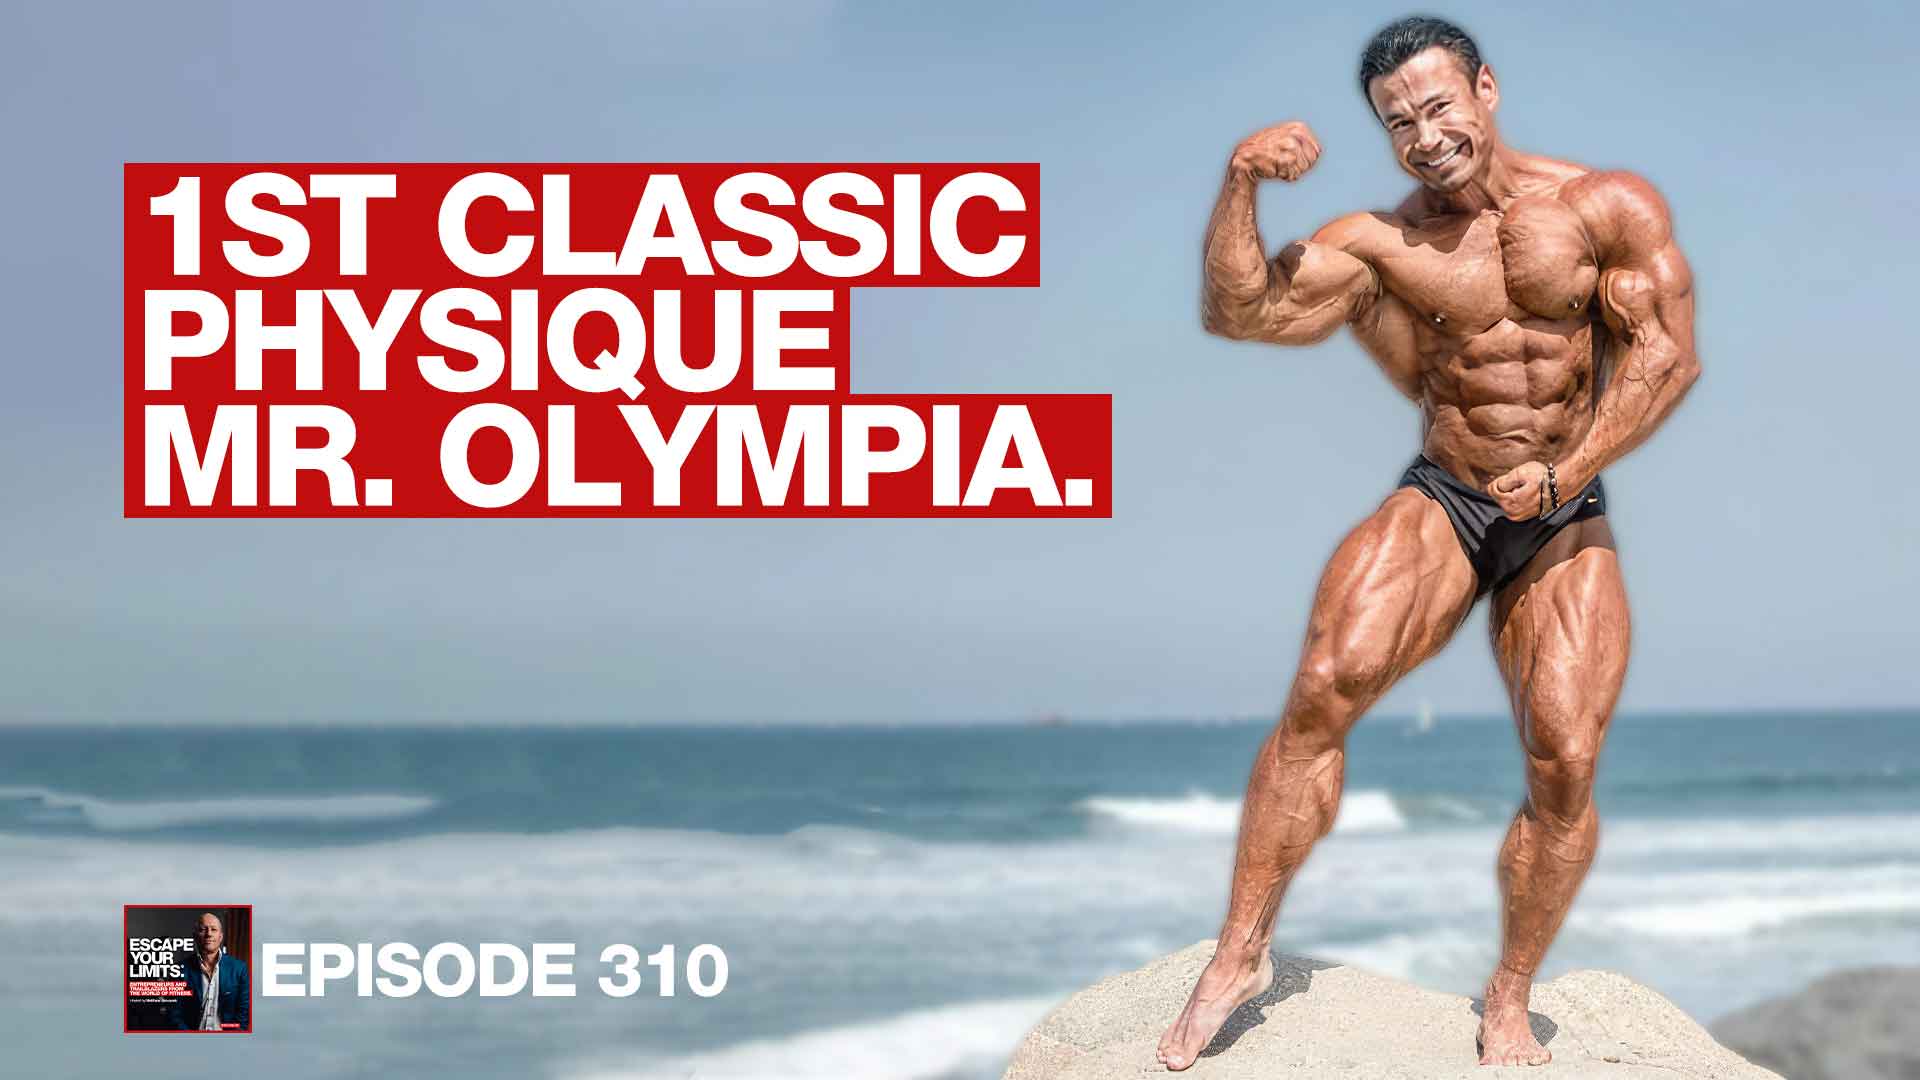 Mr Olympia, Danny Hester